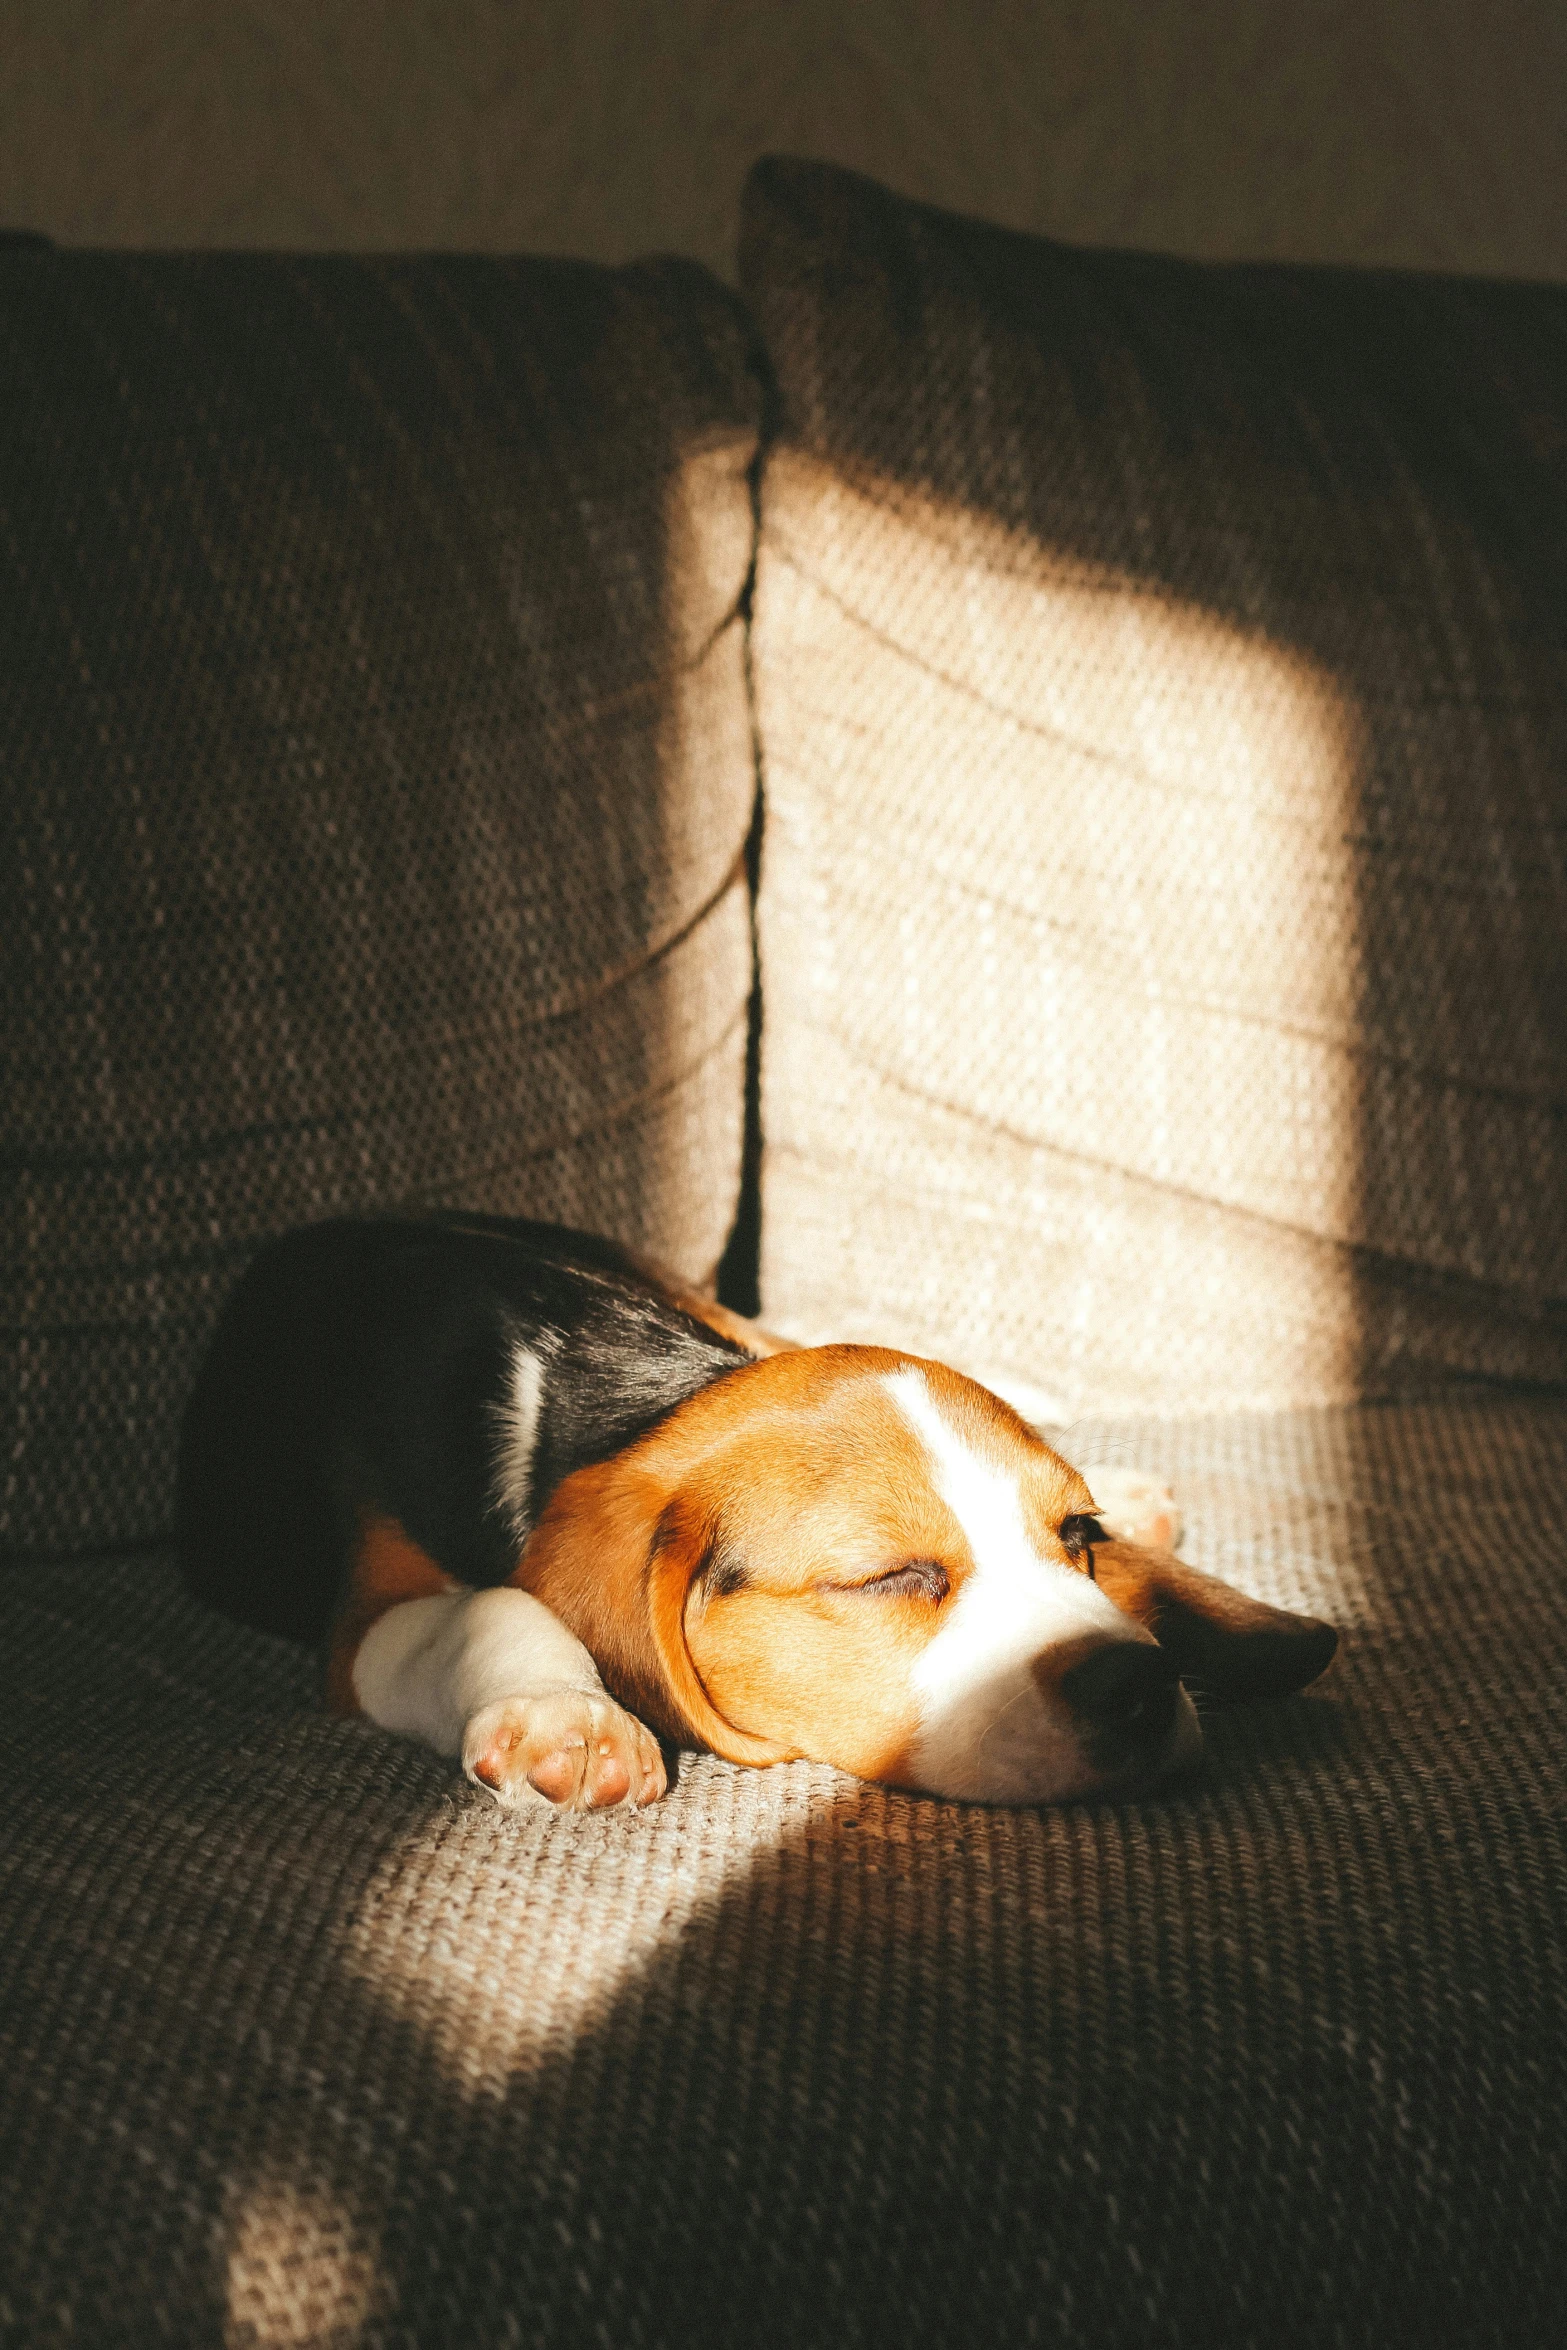 a beagle dog is sleeping on a couch